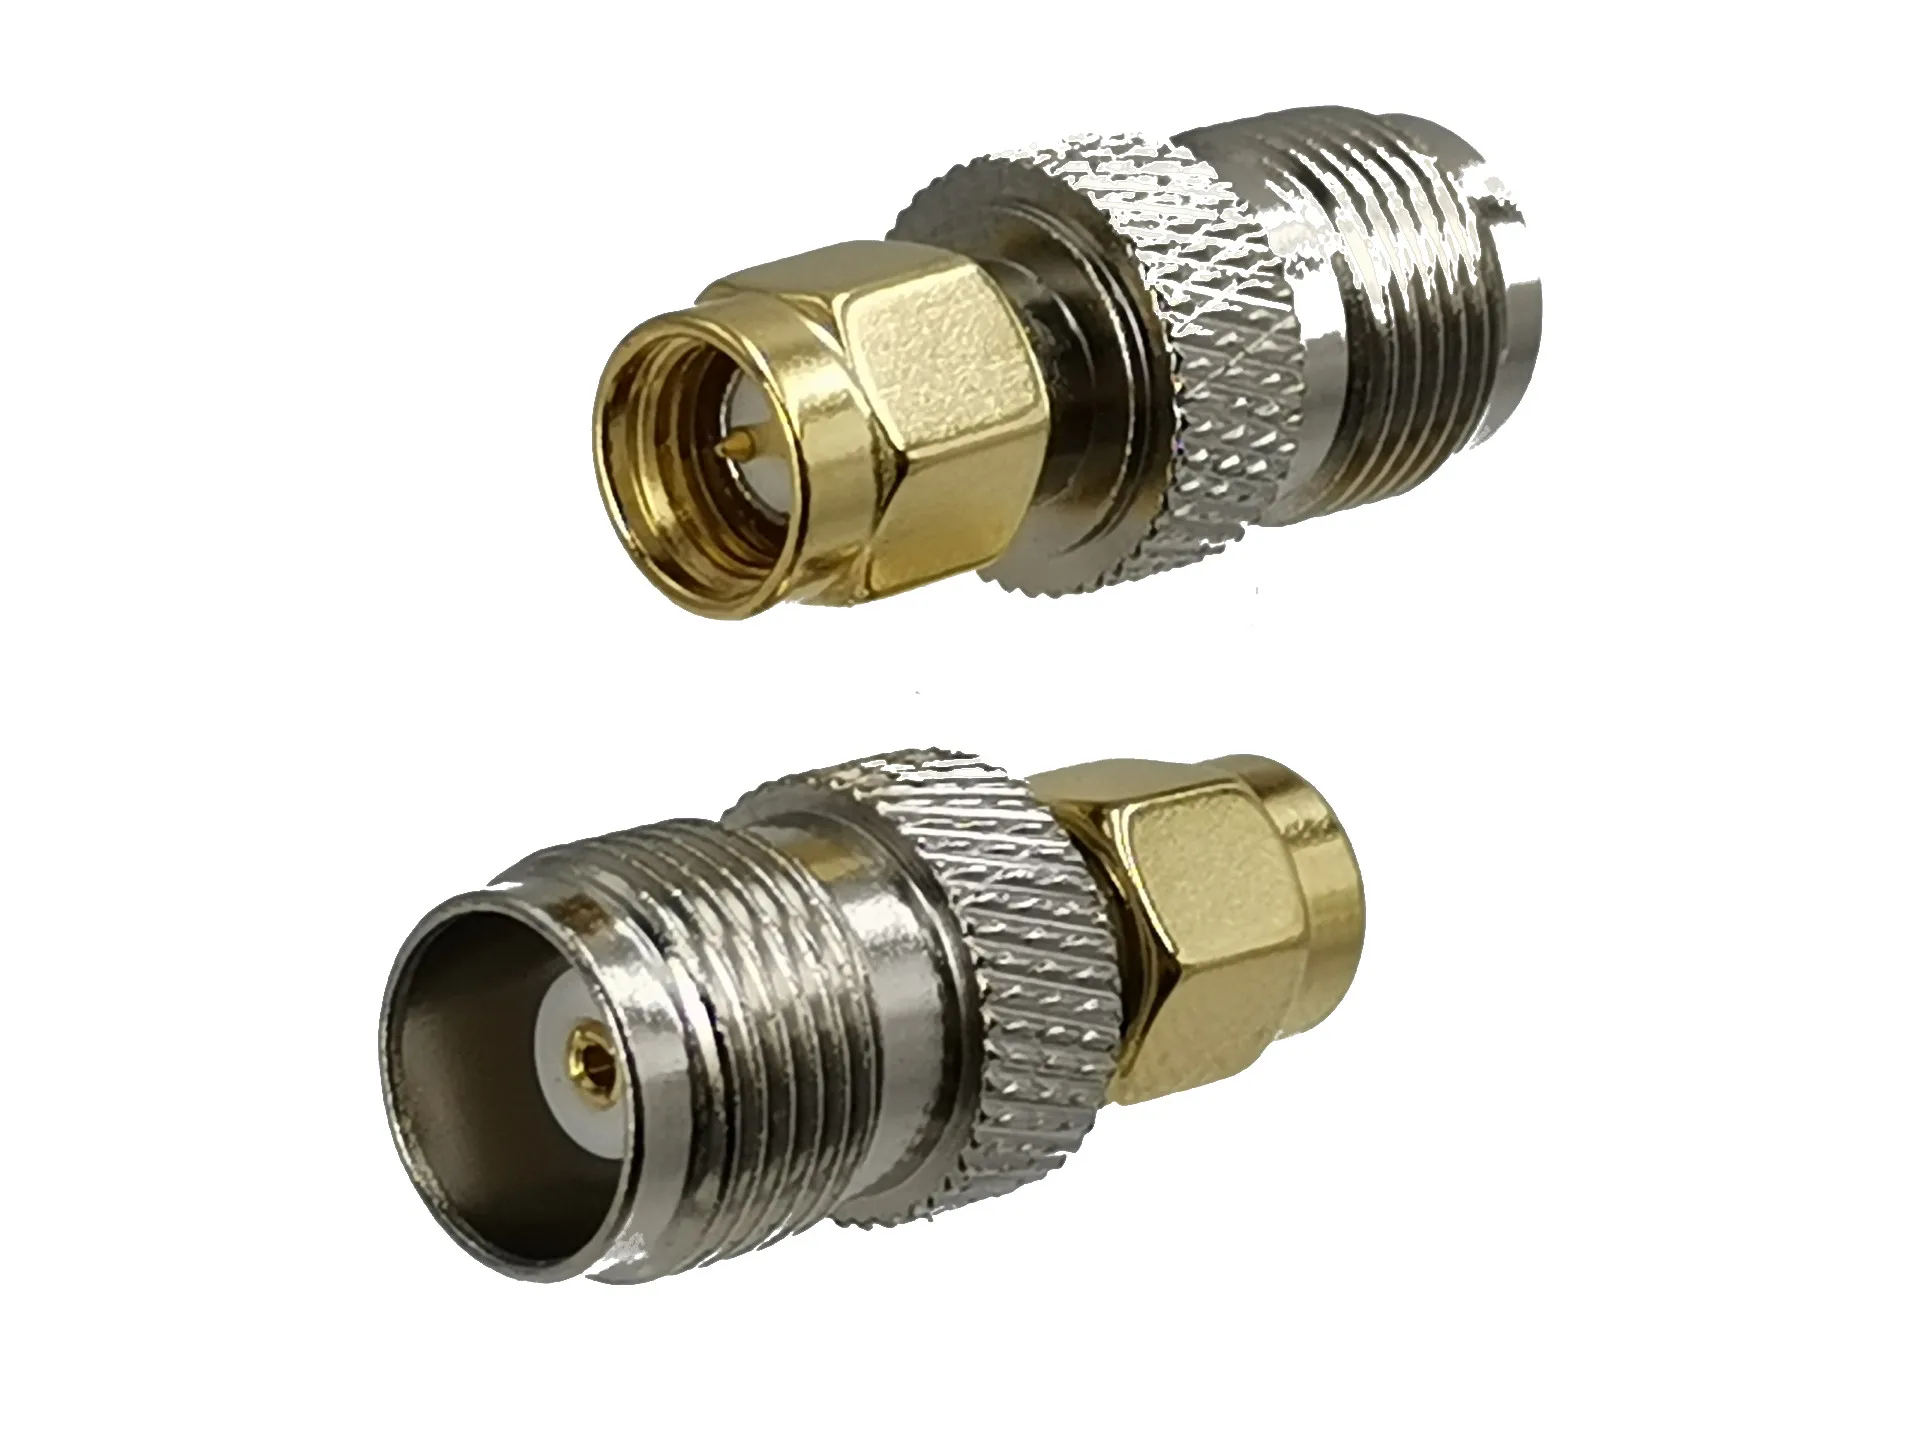 1pcs-adapter-connector-tnc-female-jack-to-sma-male-plug-rf-coaxial-brass-straight-new